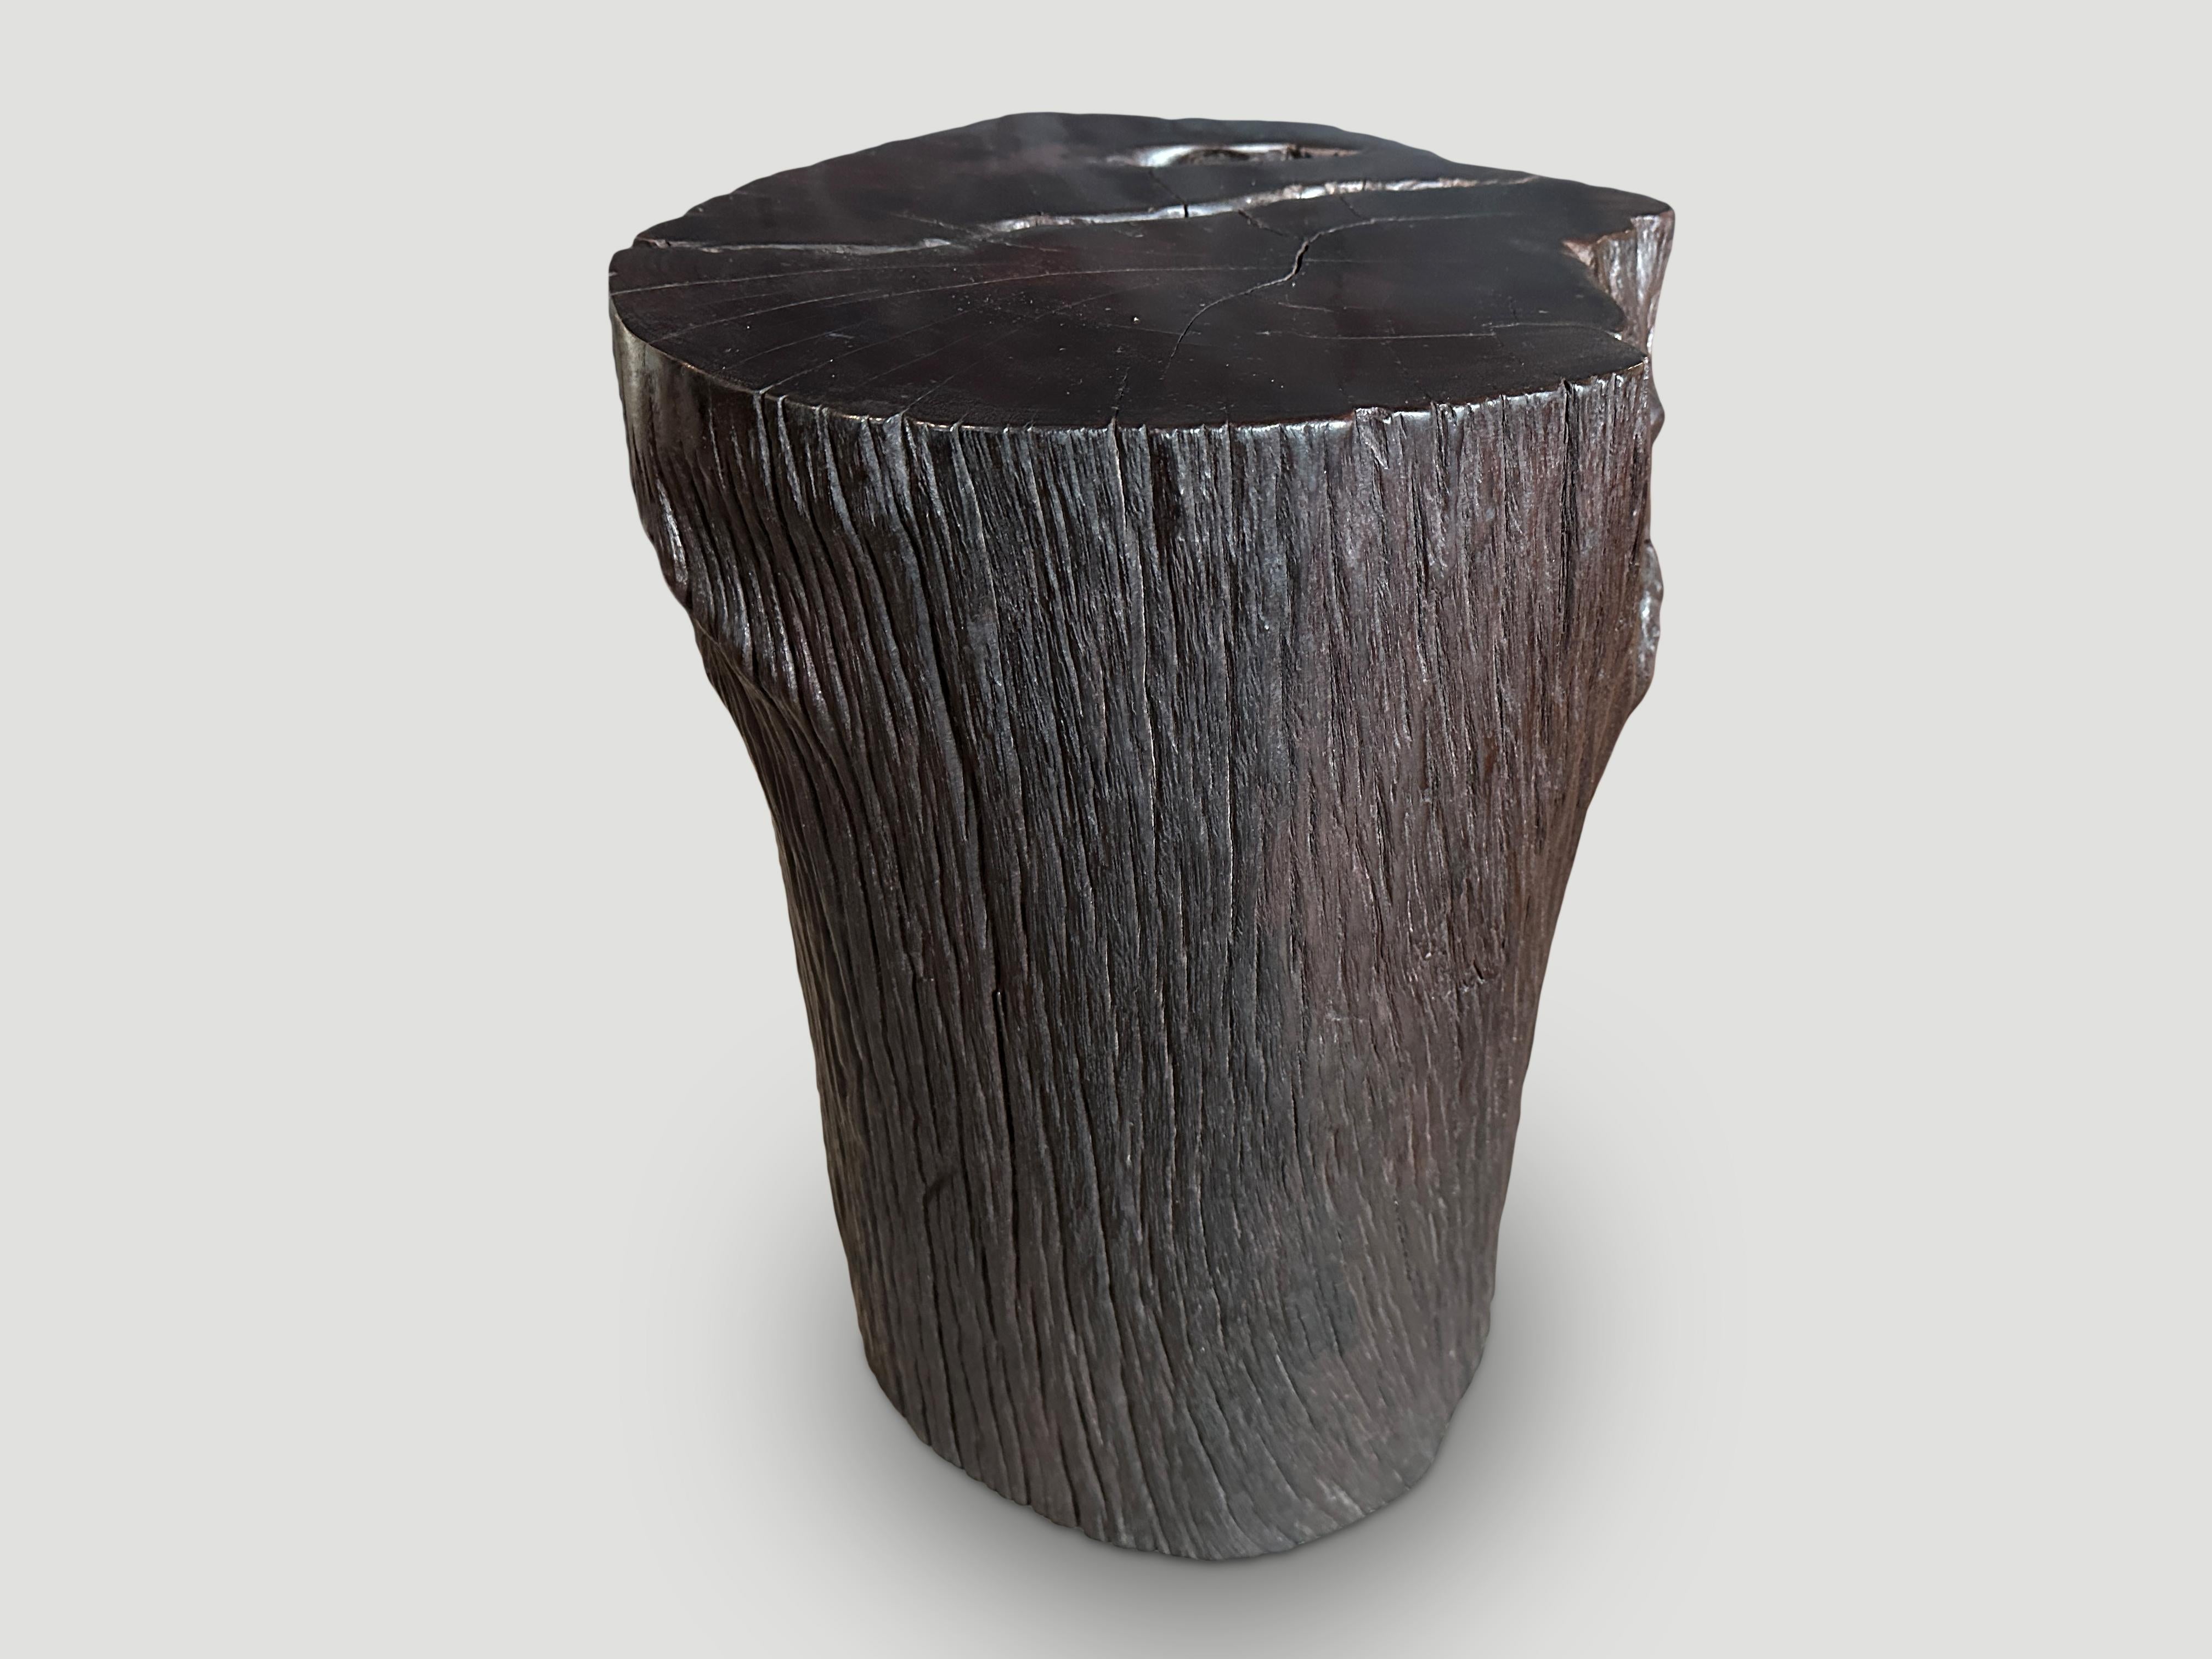 Andrianna Shamaris Ulin Wood Side Table or Stool In Excellent Condition For Sale In New York, NY